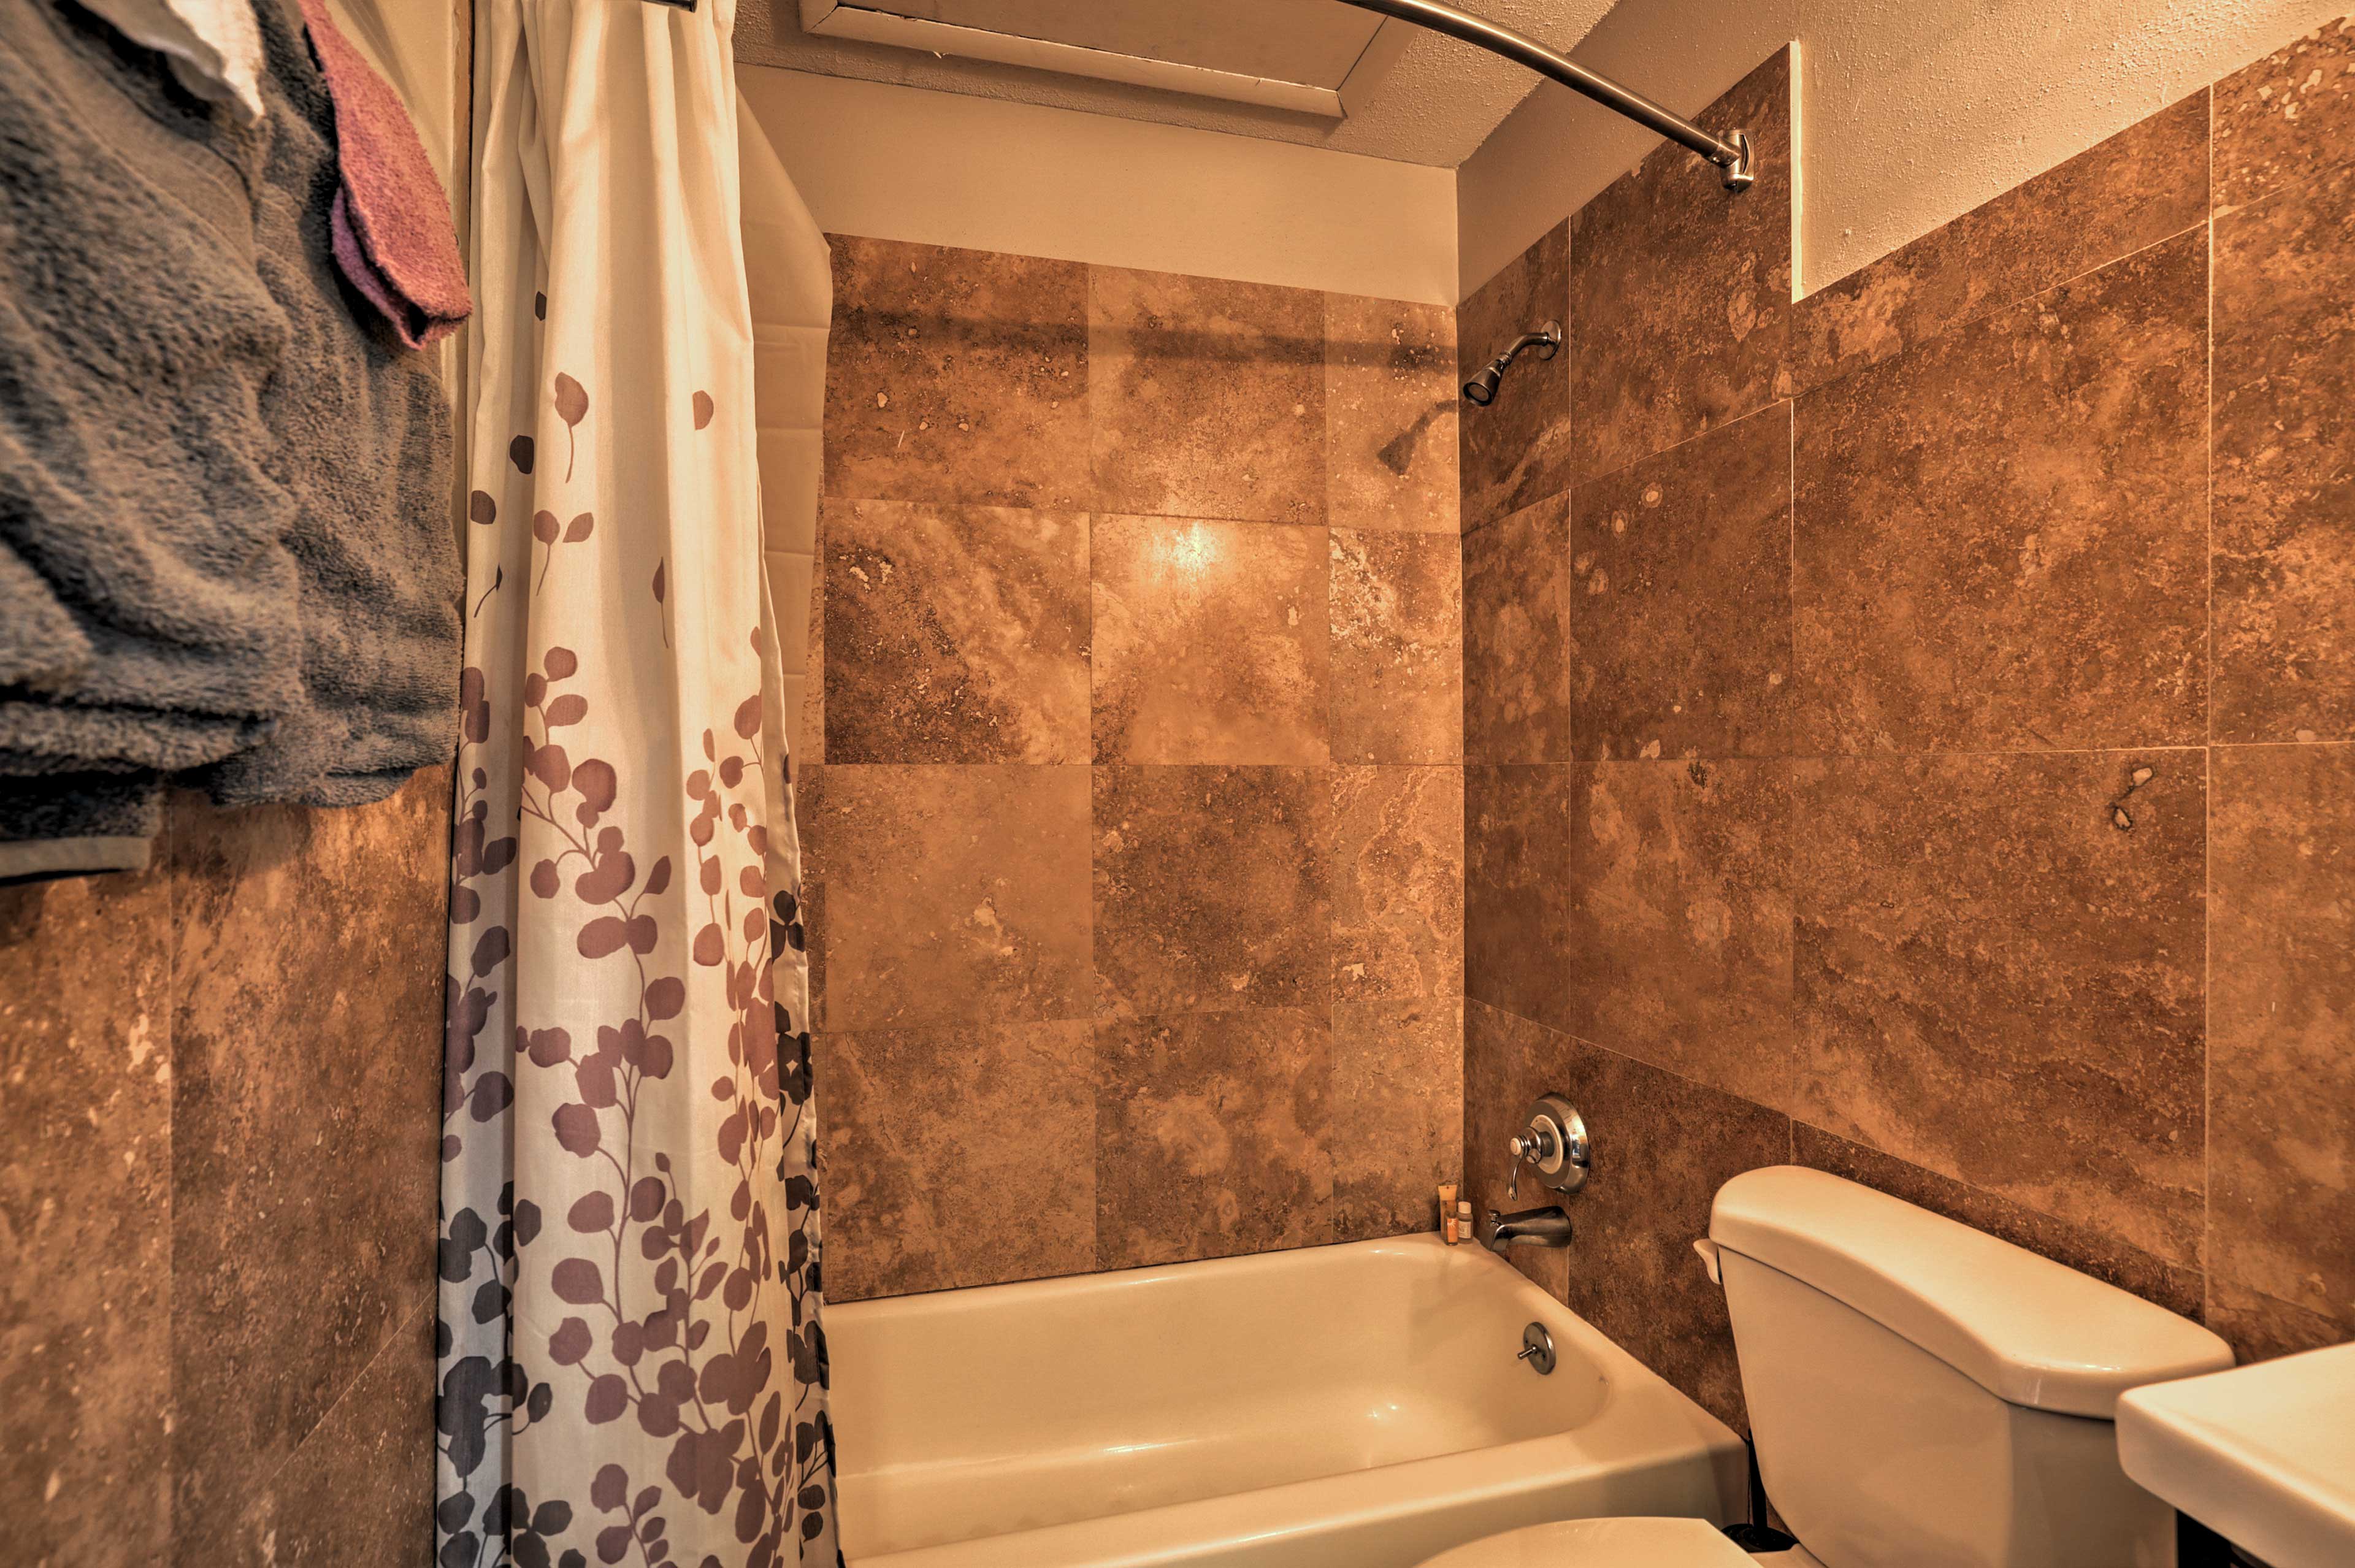 The bathroom offers a shower/tub combo.